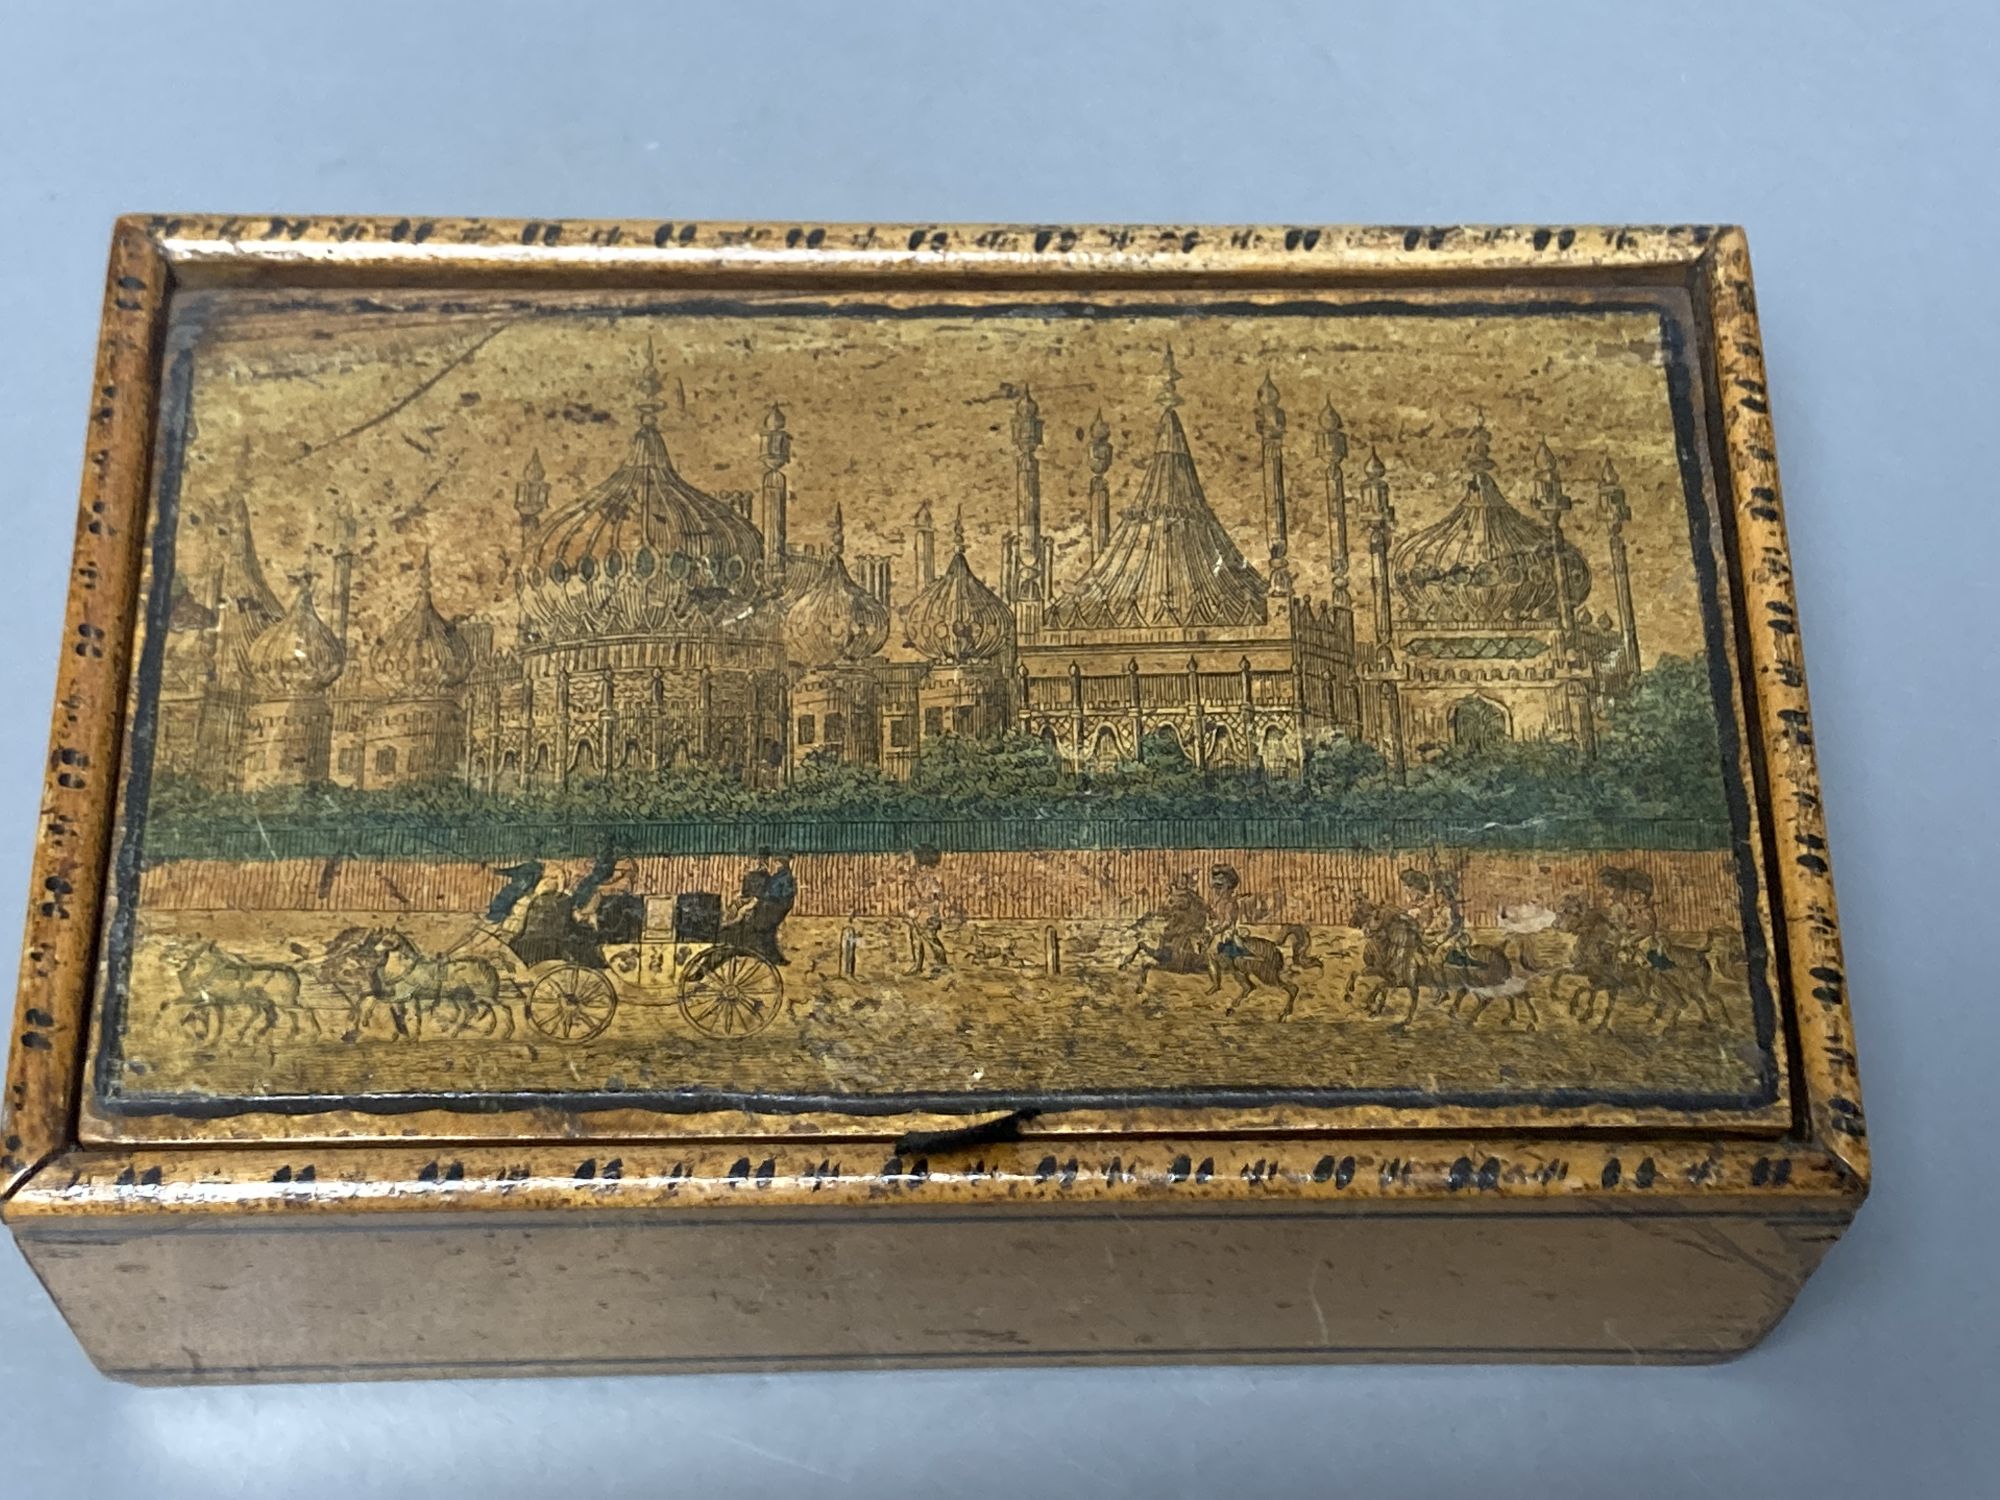 An early Tunbridge ware sycamore box with printed view of the East front of Brighton Pavilion, c.1810, 15cm